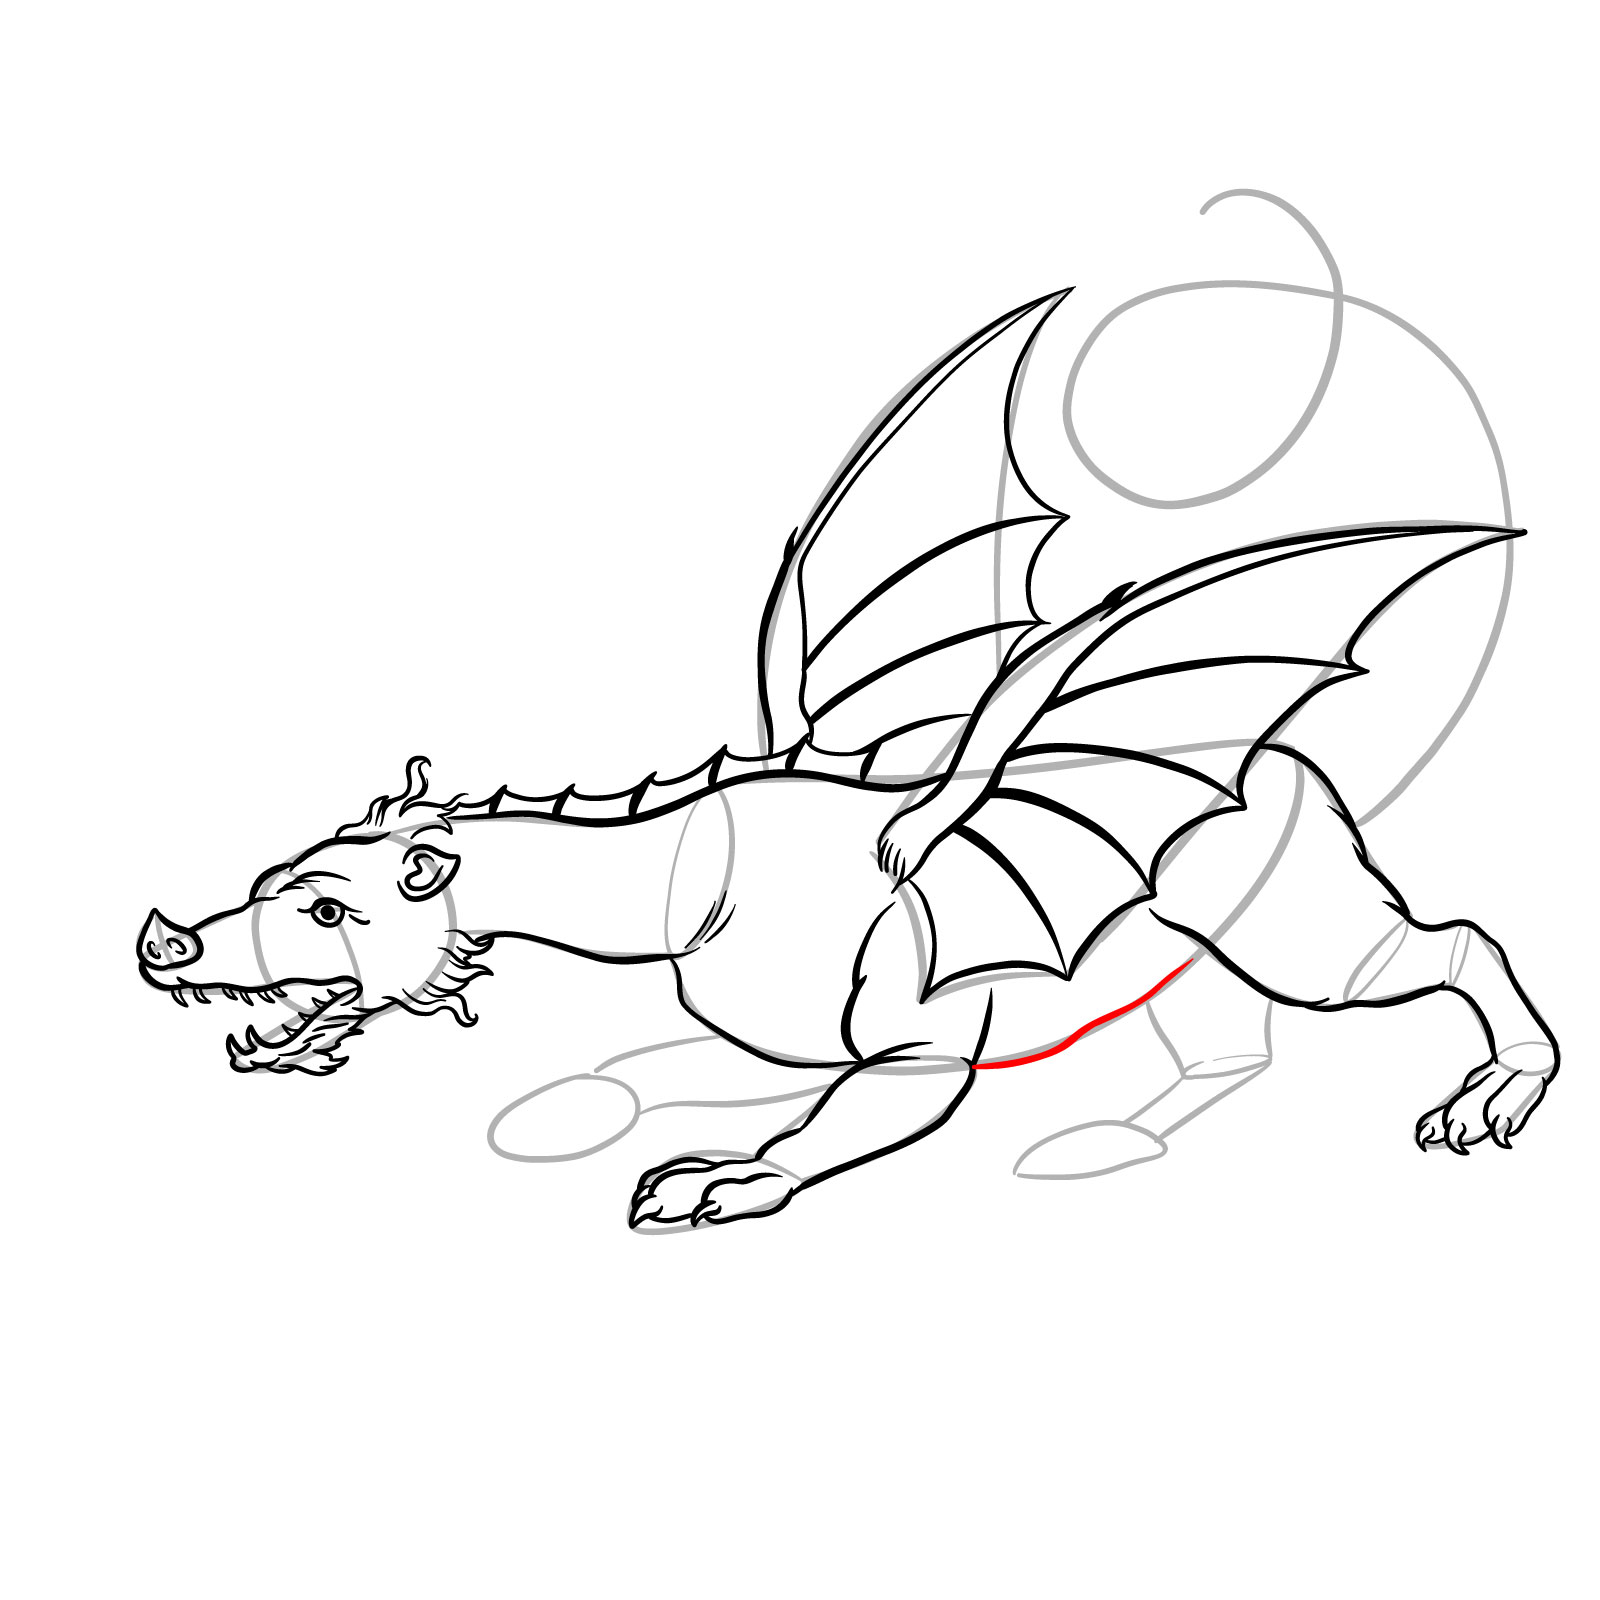 How to draw a classic European dragon - step 33